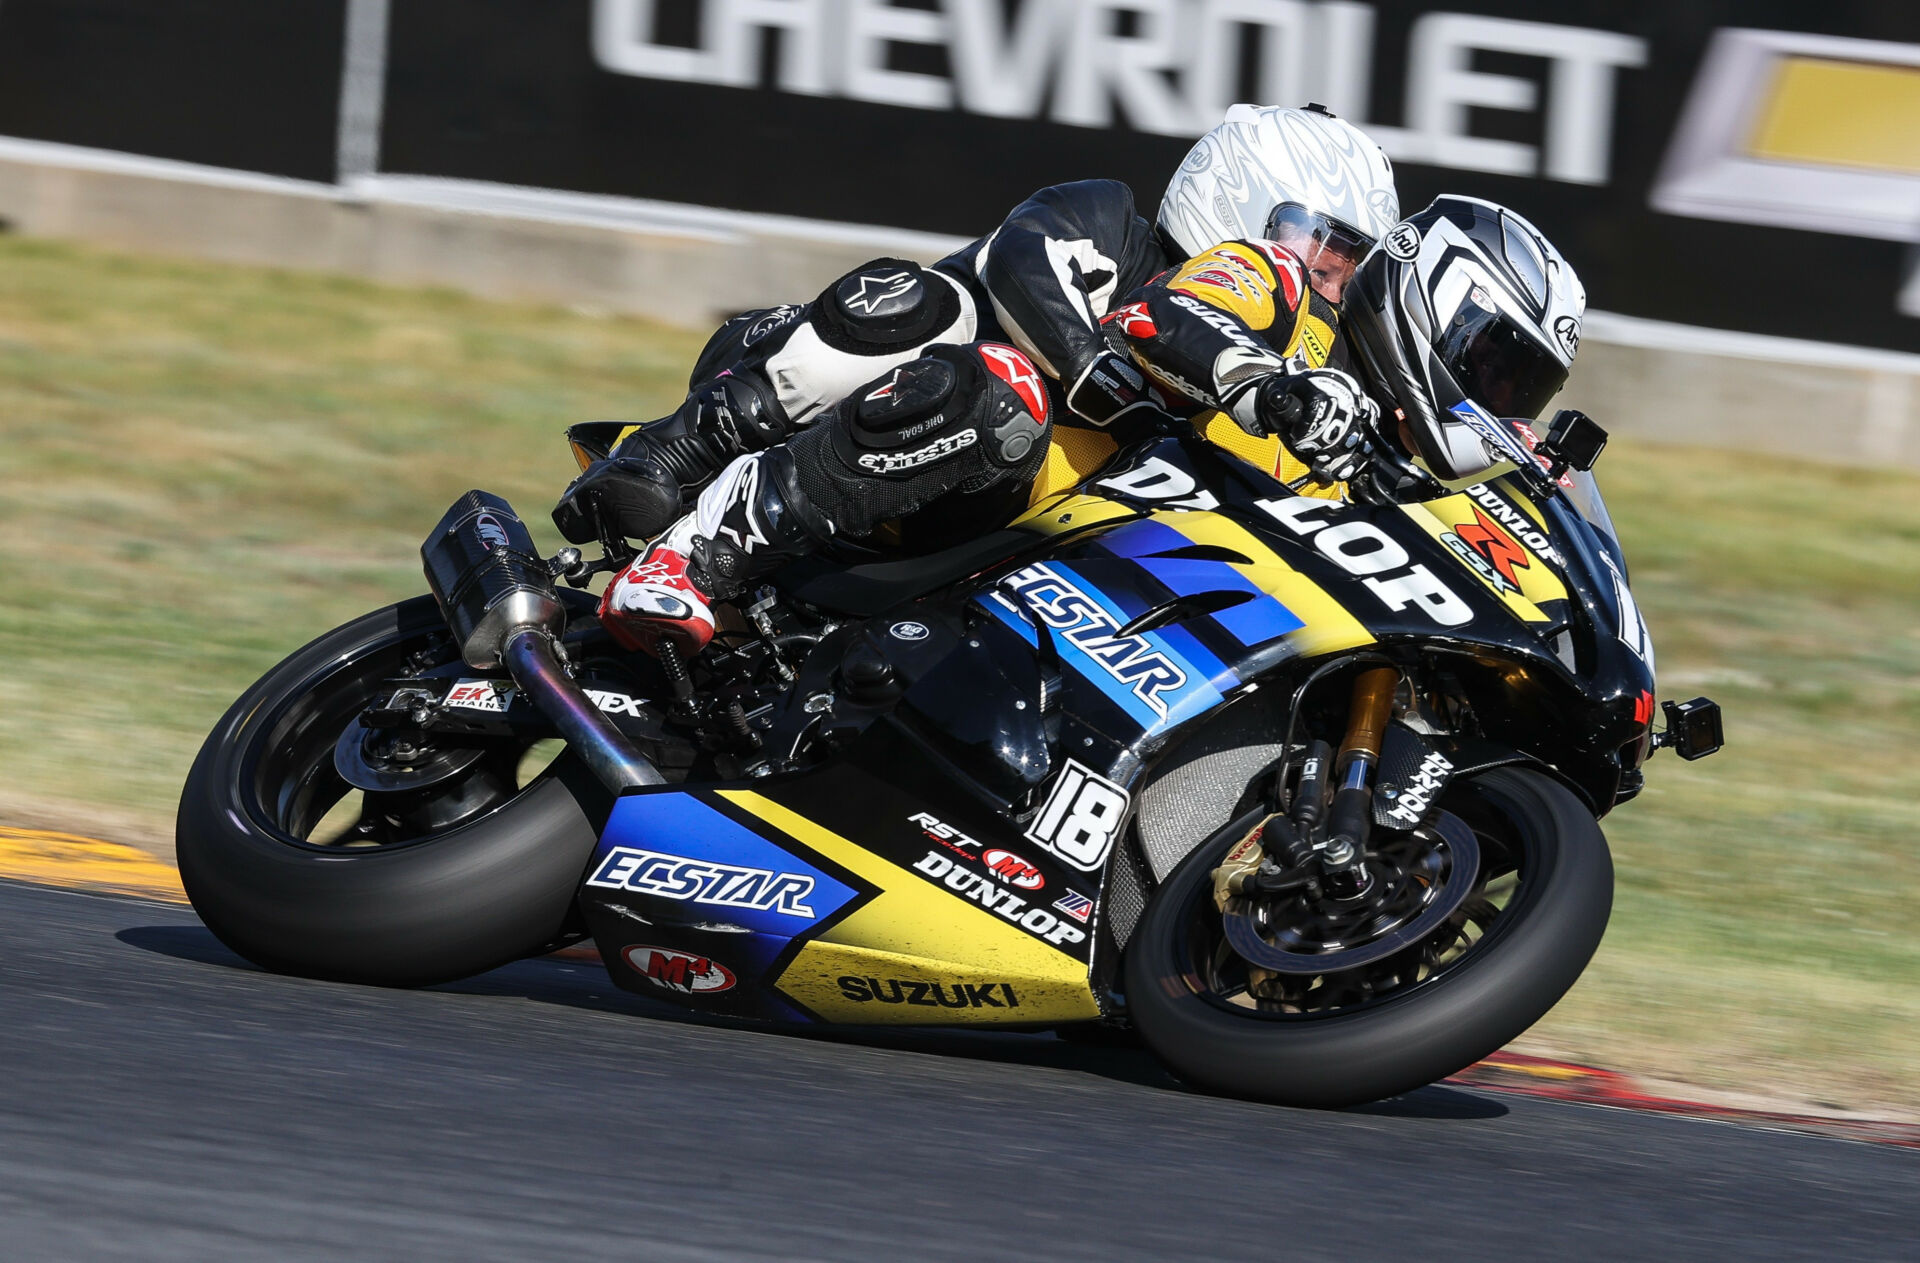 Chris Ulrich giving a fan a ride on the Dunlop ECSTAR Suzuki GSX-R1000 two-seat Superbike during a MotoAmerica event in 2021. Photo by Brian J. Nelson.